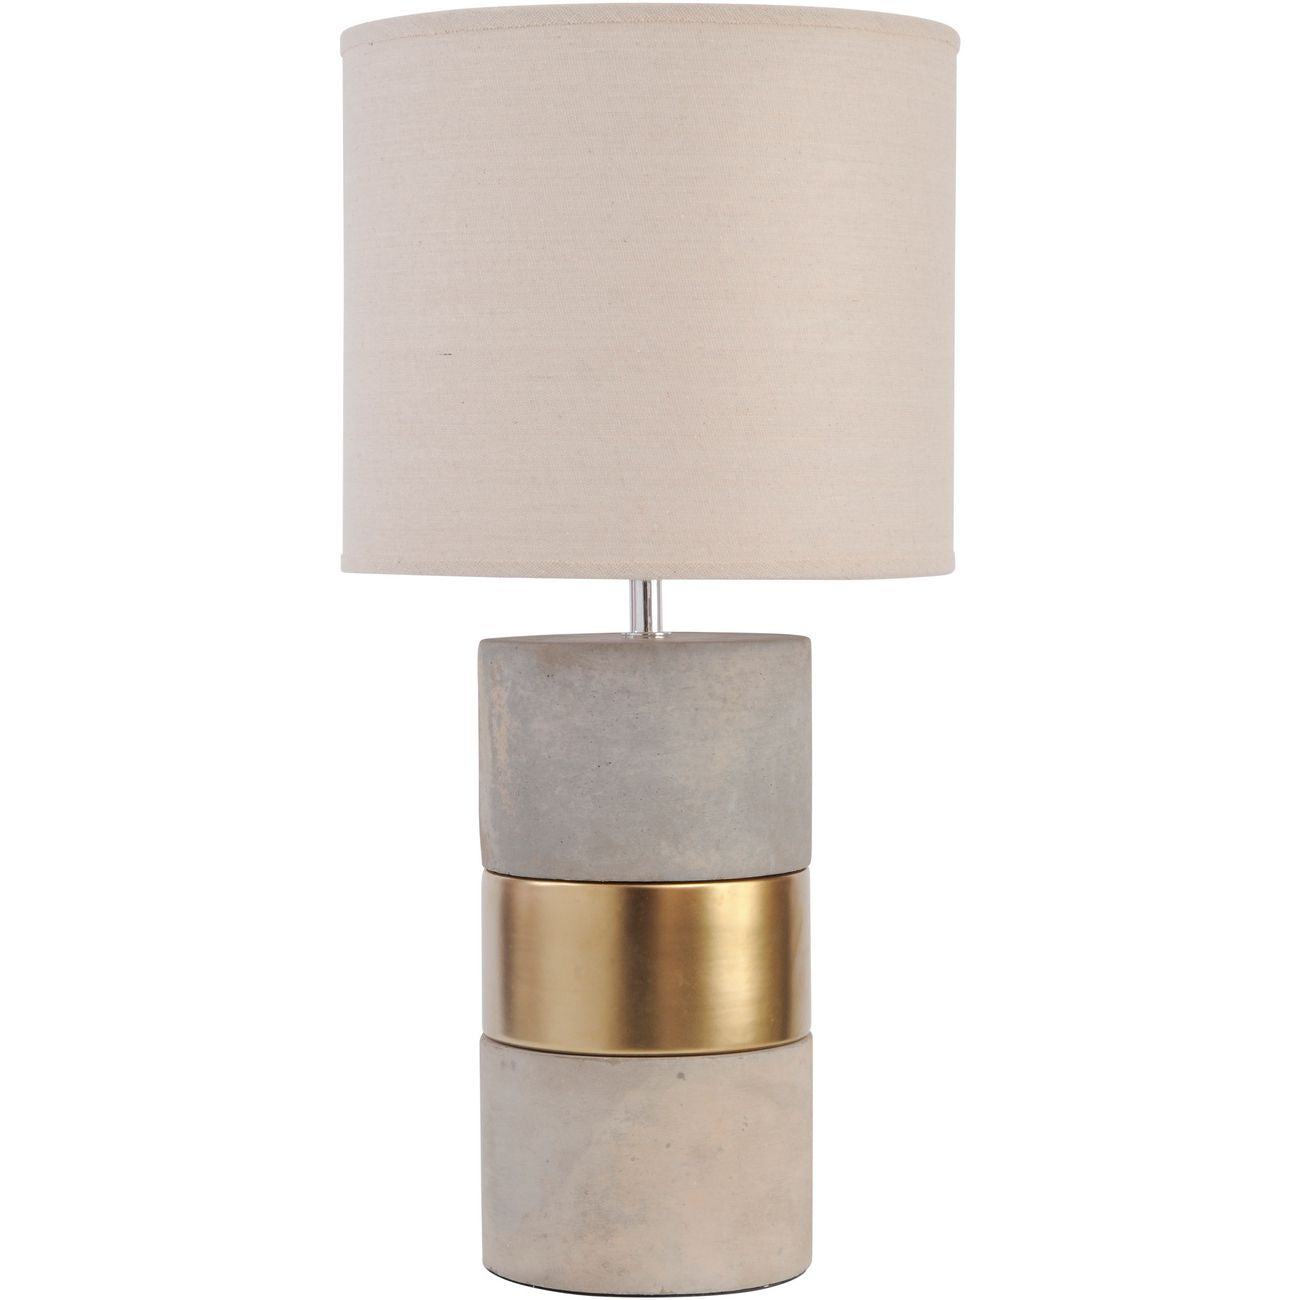 Concrete and gold table lamp w shade REDUCED sold in pairs only-Renaissance Design Studio